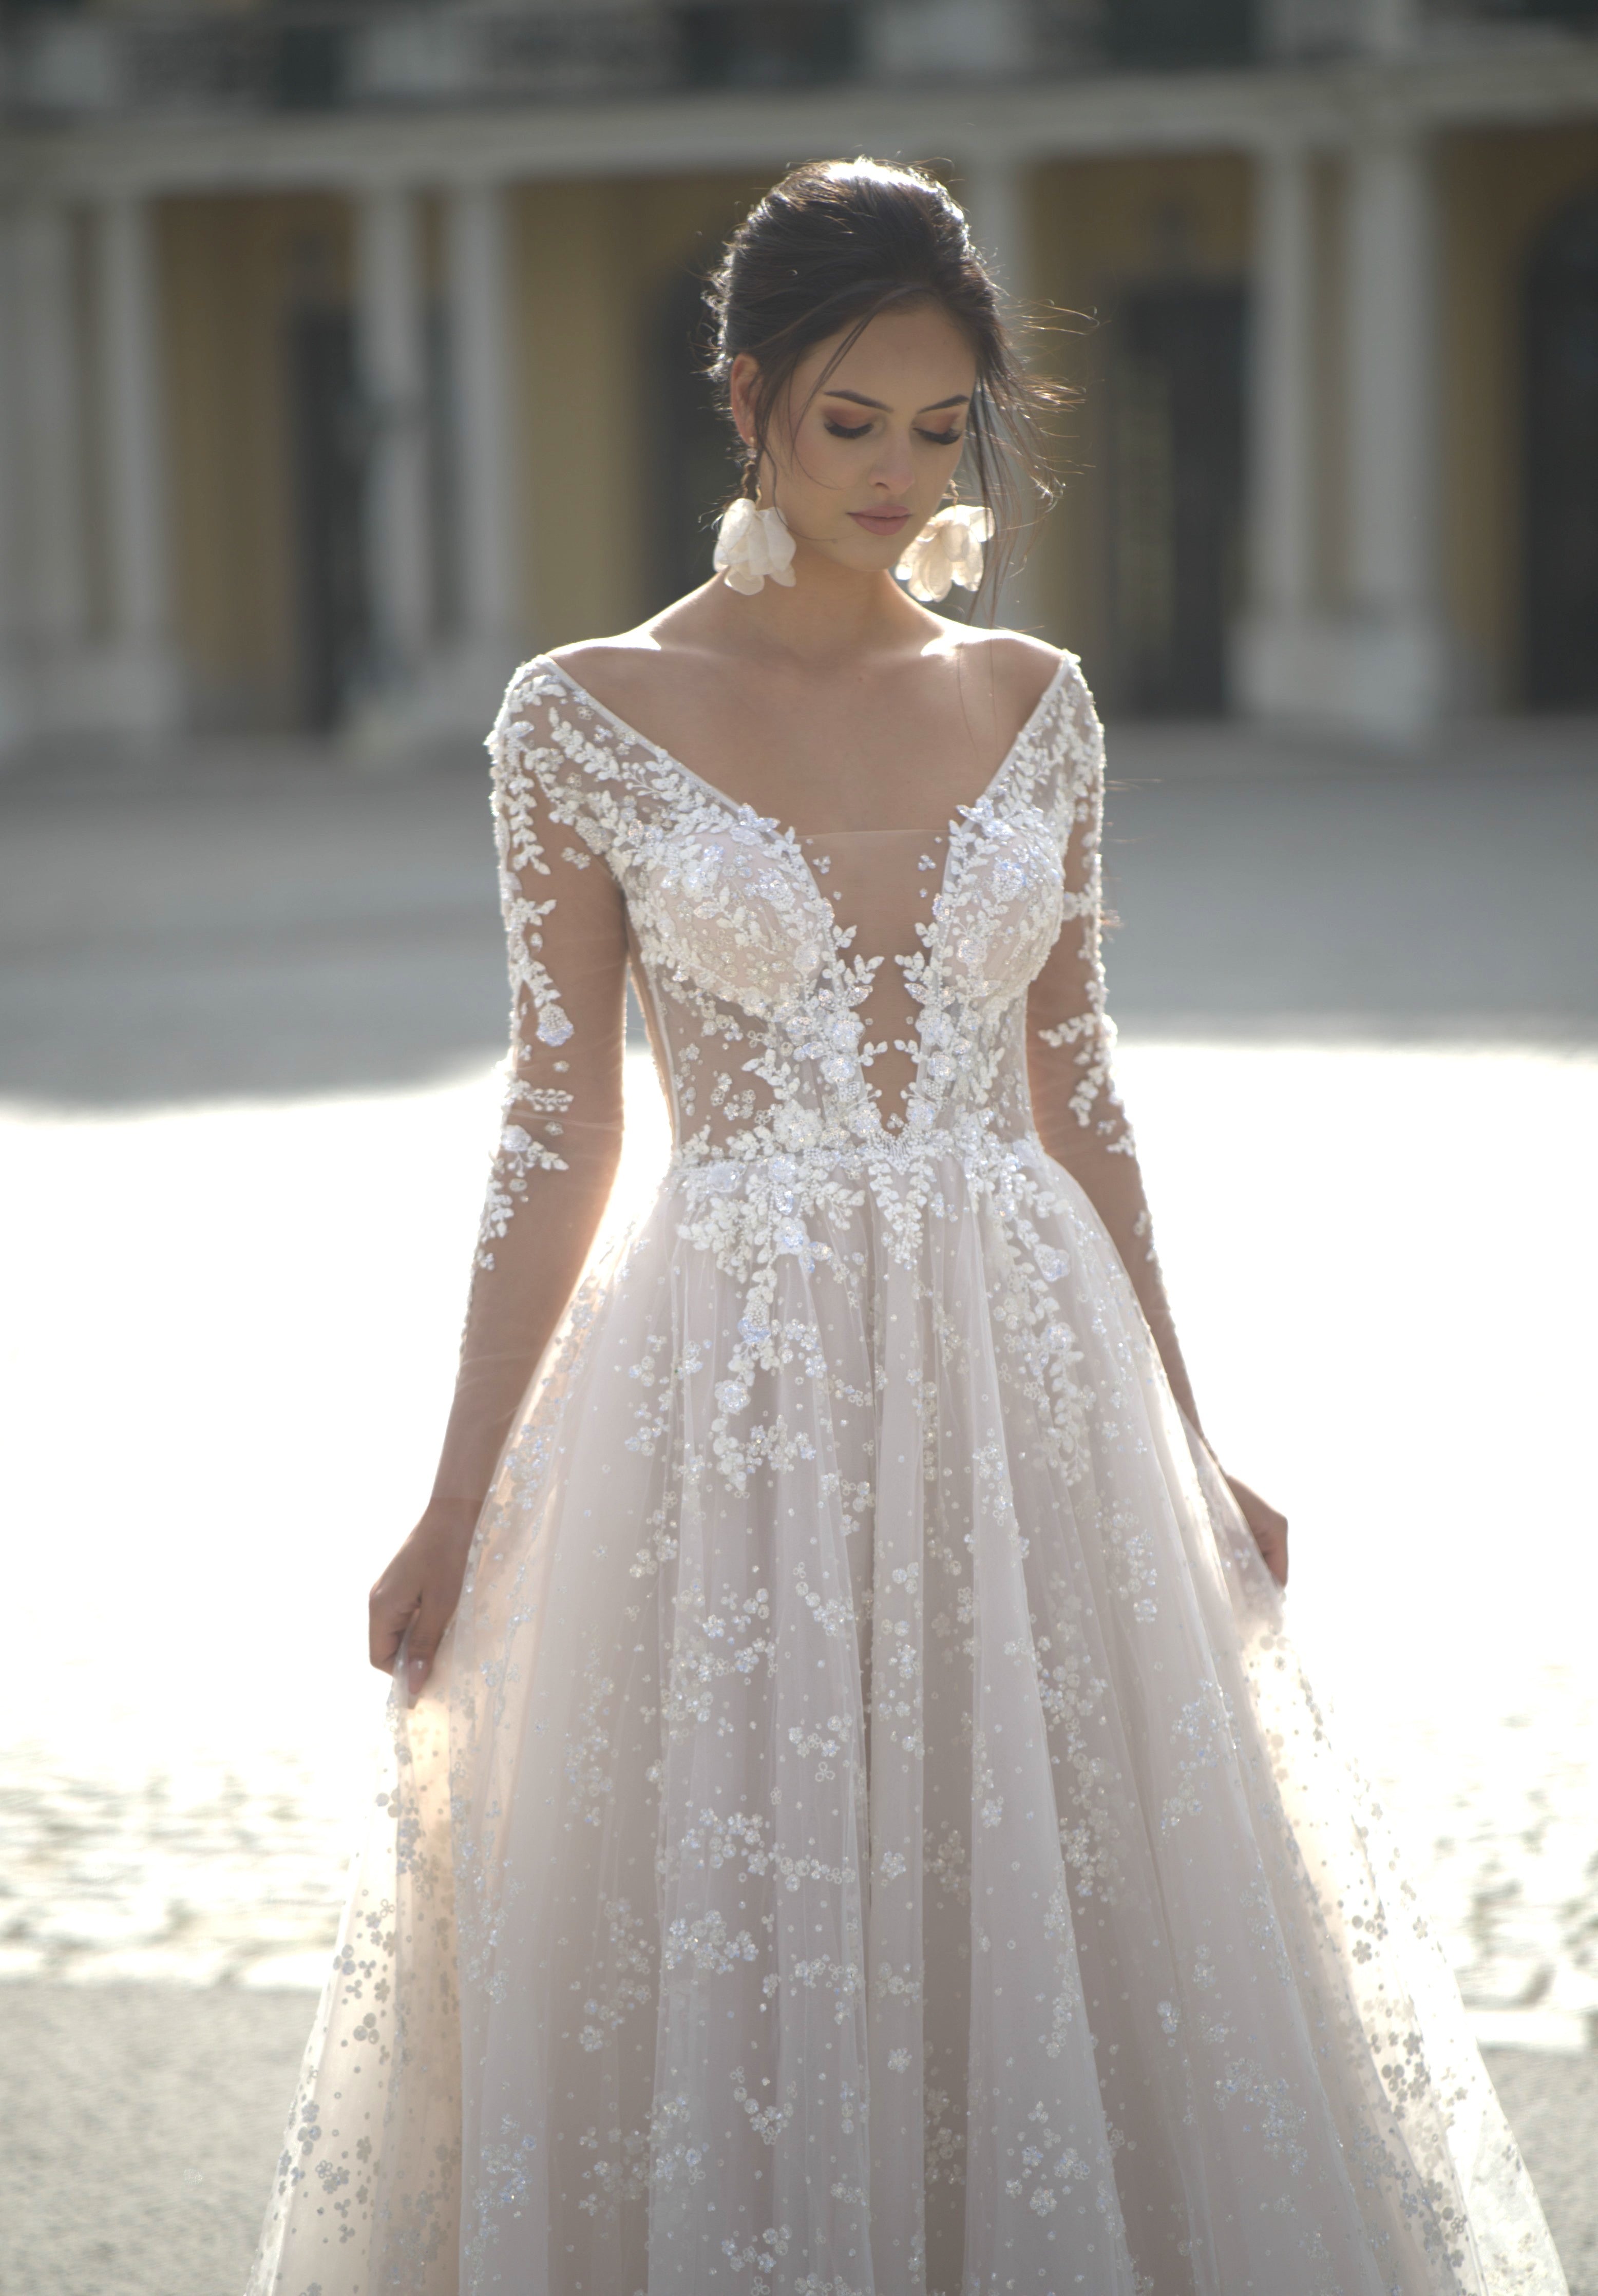 Sheer Neck Cap Sleeved Long Wedding Dress With Corset Low Back Lace Bodice Bridal  Gown With Removable Beaded Sash Bride Dress Custom Made From Bohobridal,  $105.53